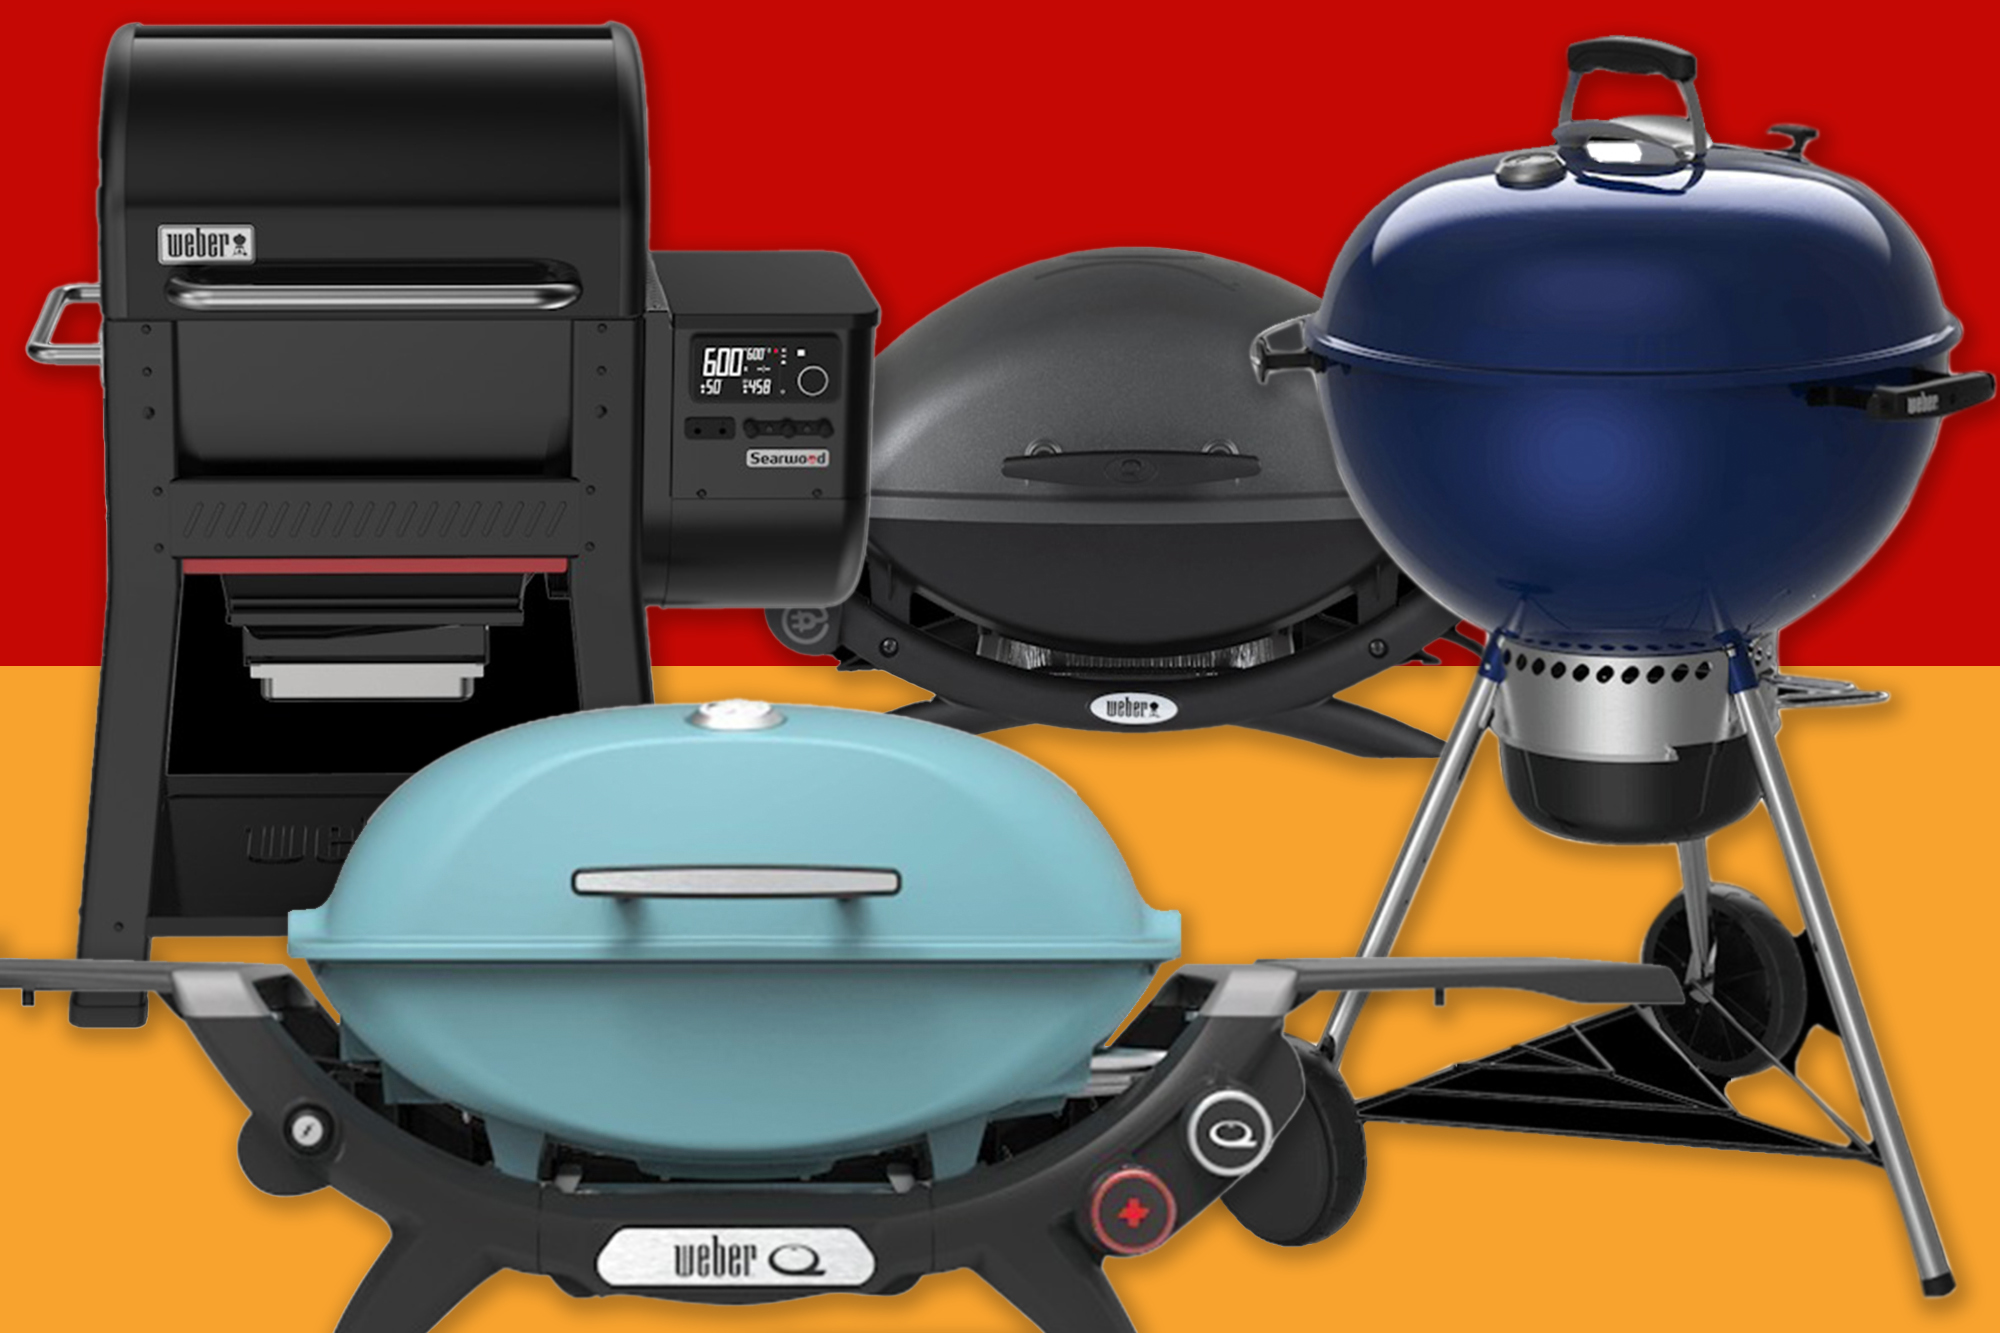 Get your BBQ on this Memorial Day with a Weber grill and make the perfect burger using new smart app technology